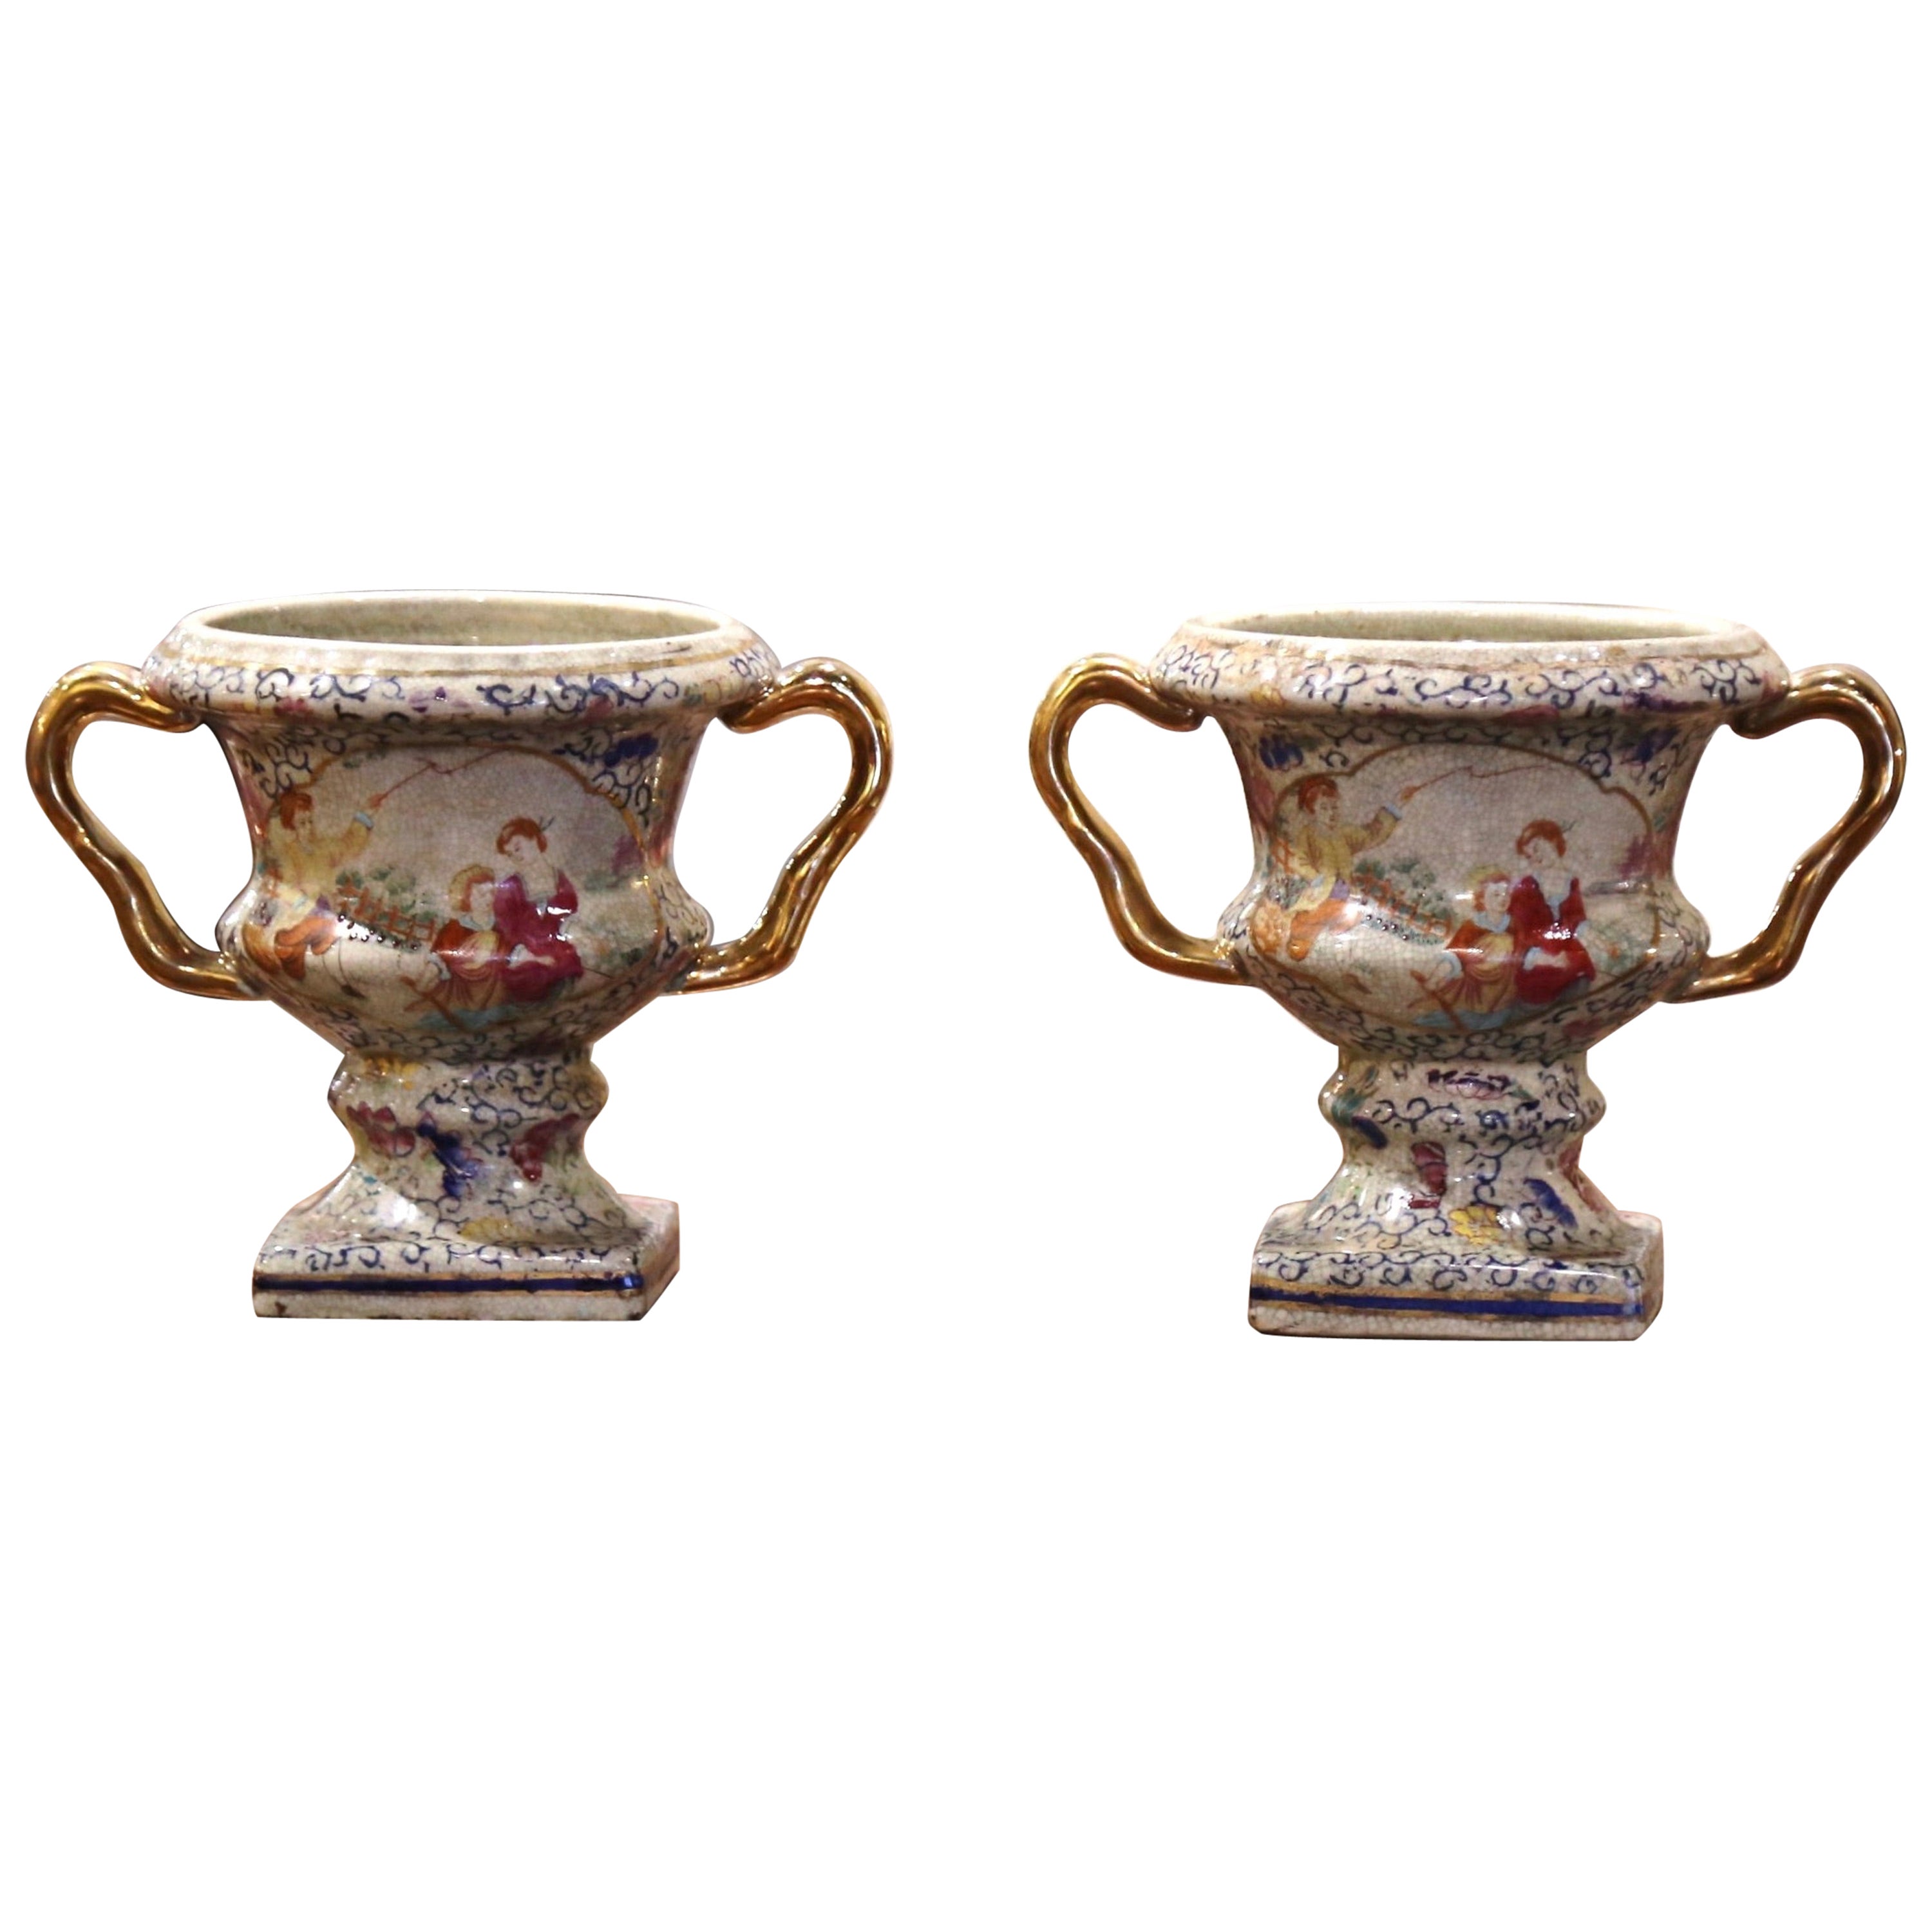 Pair of Midcentury Porcelain Chinese Urns For Sale